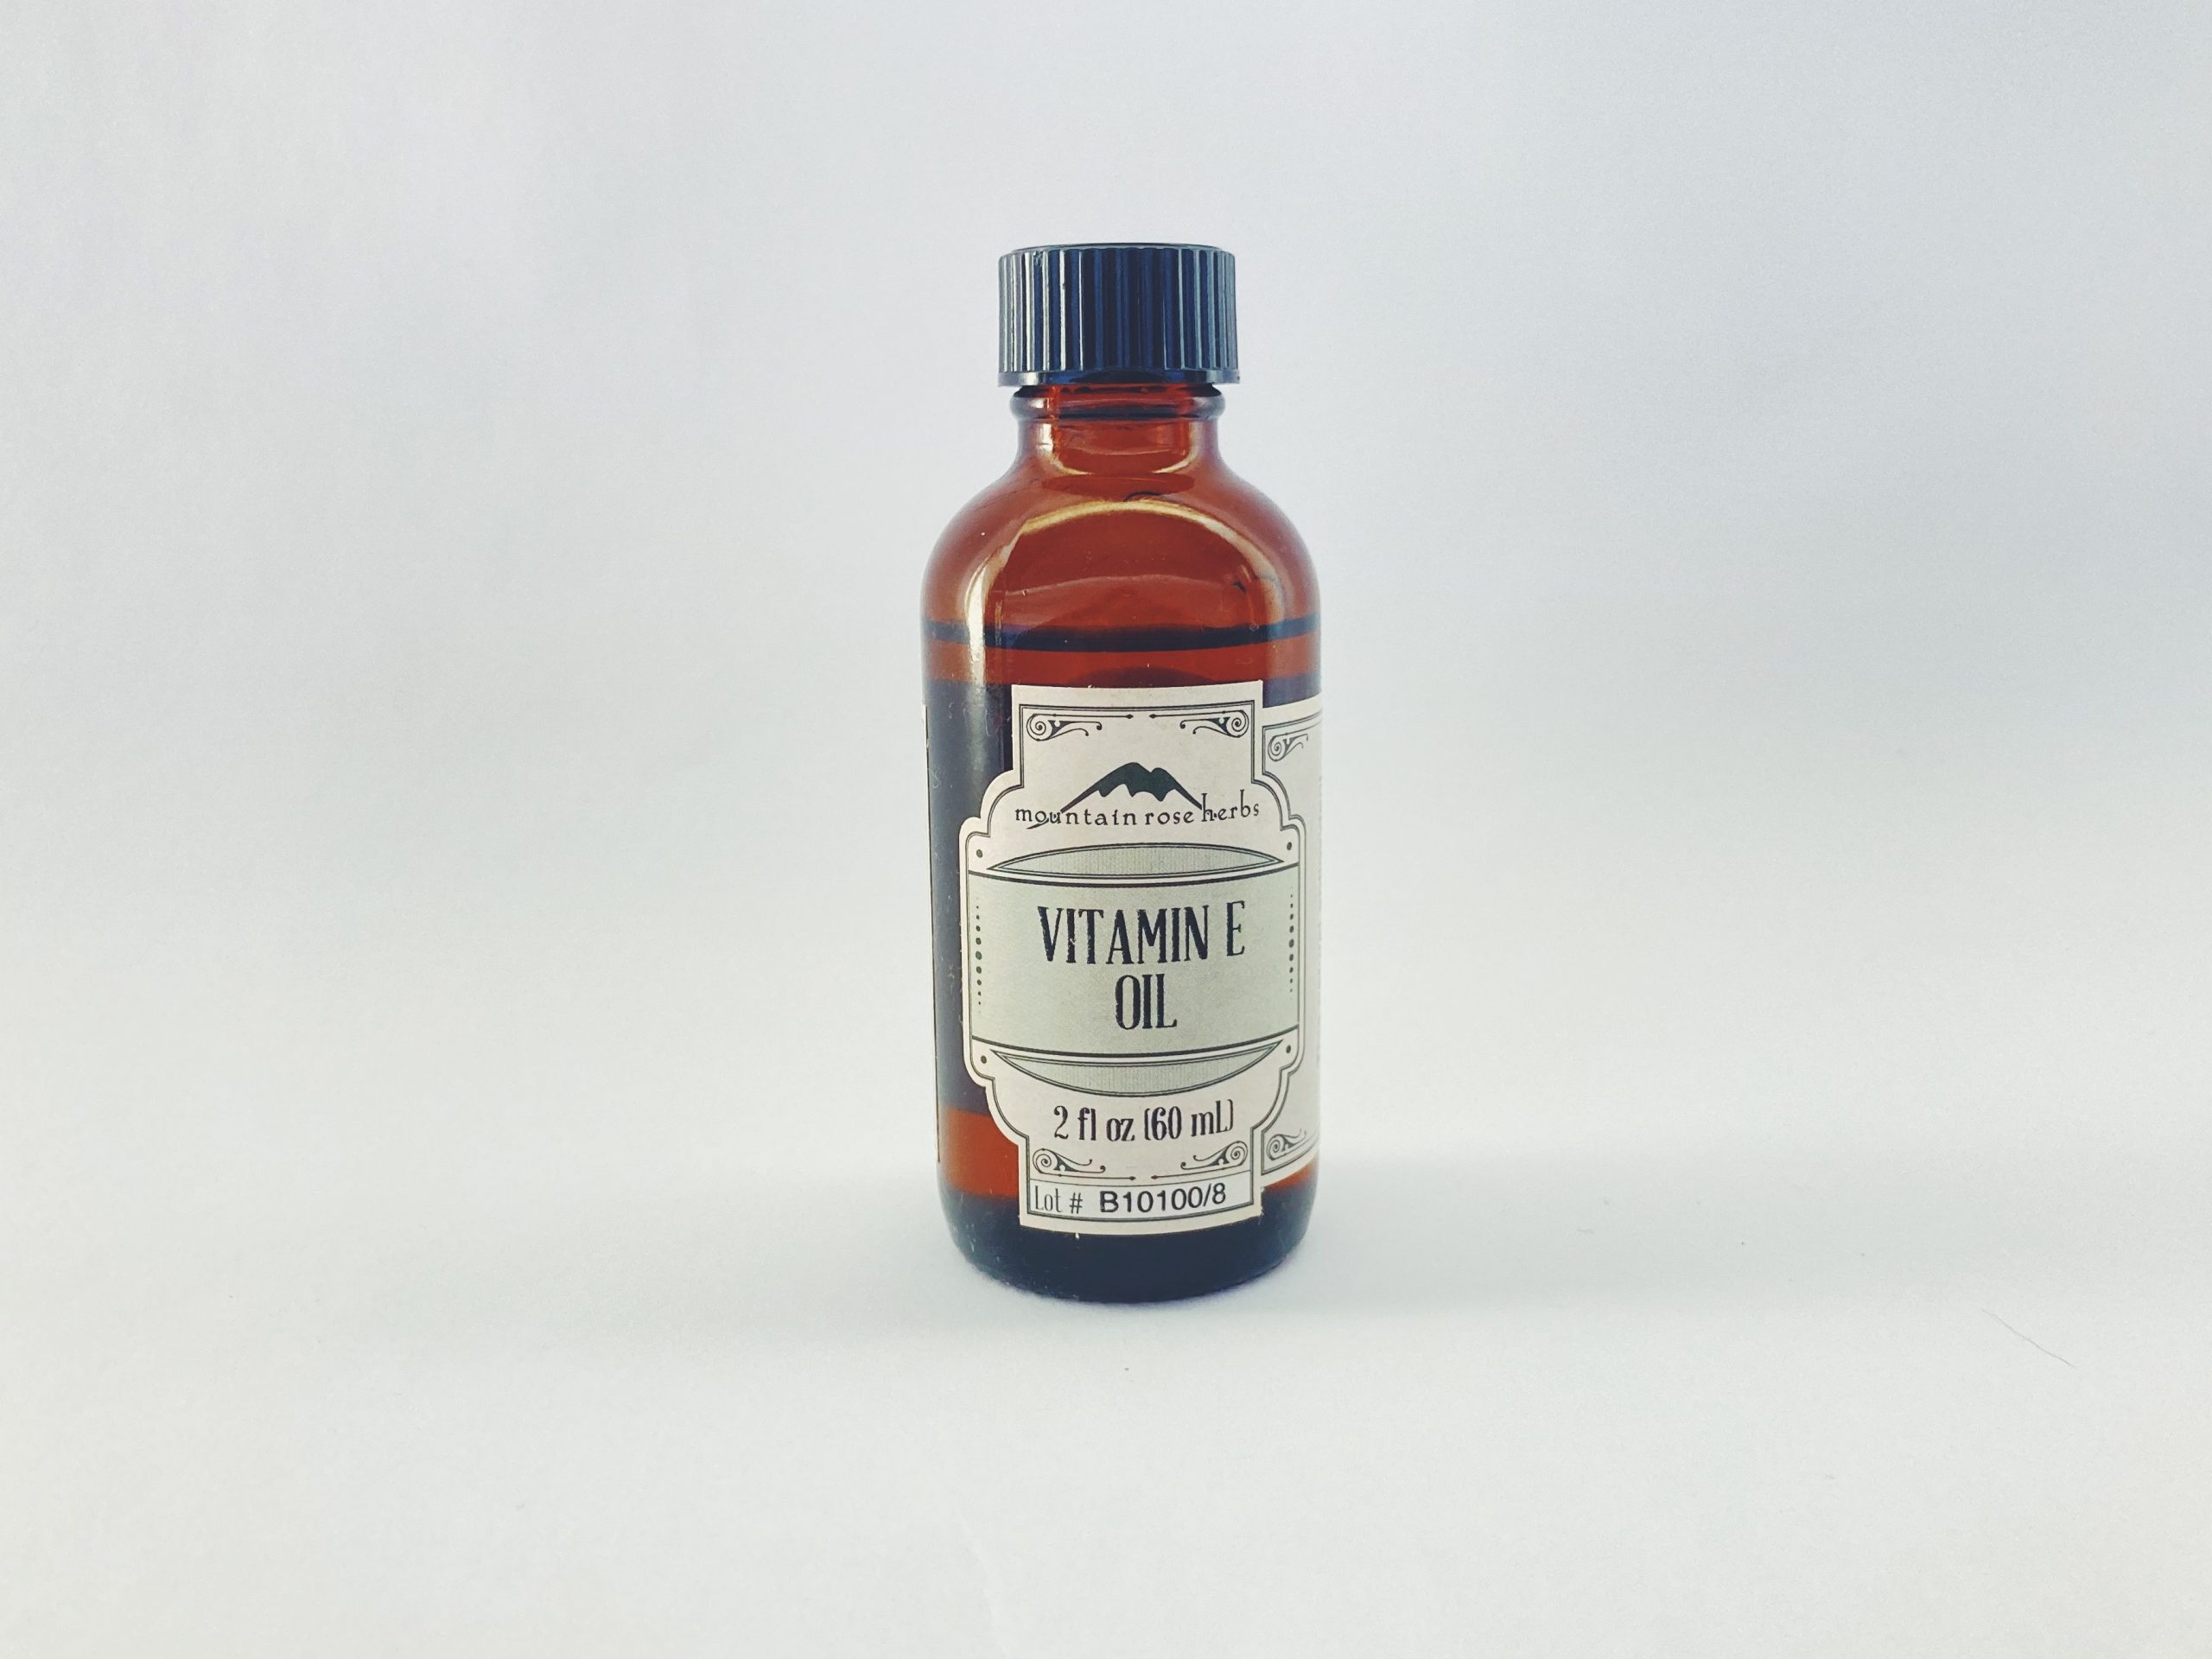 Small bottle of vitamin E oil on a white background.